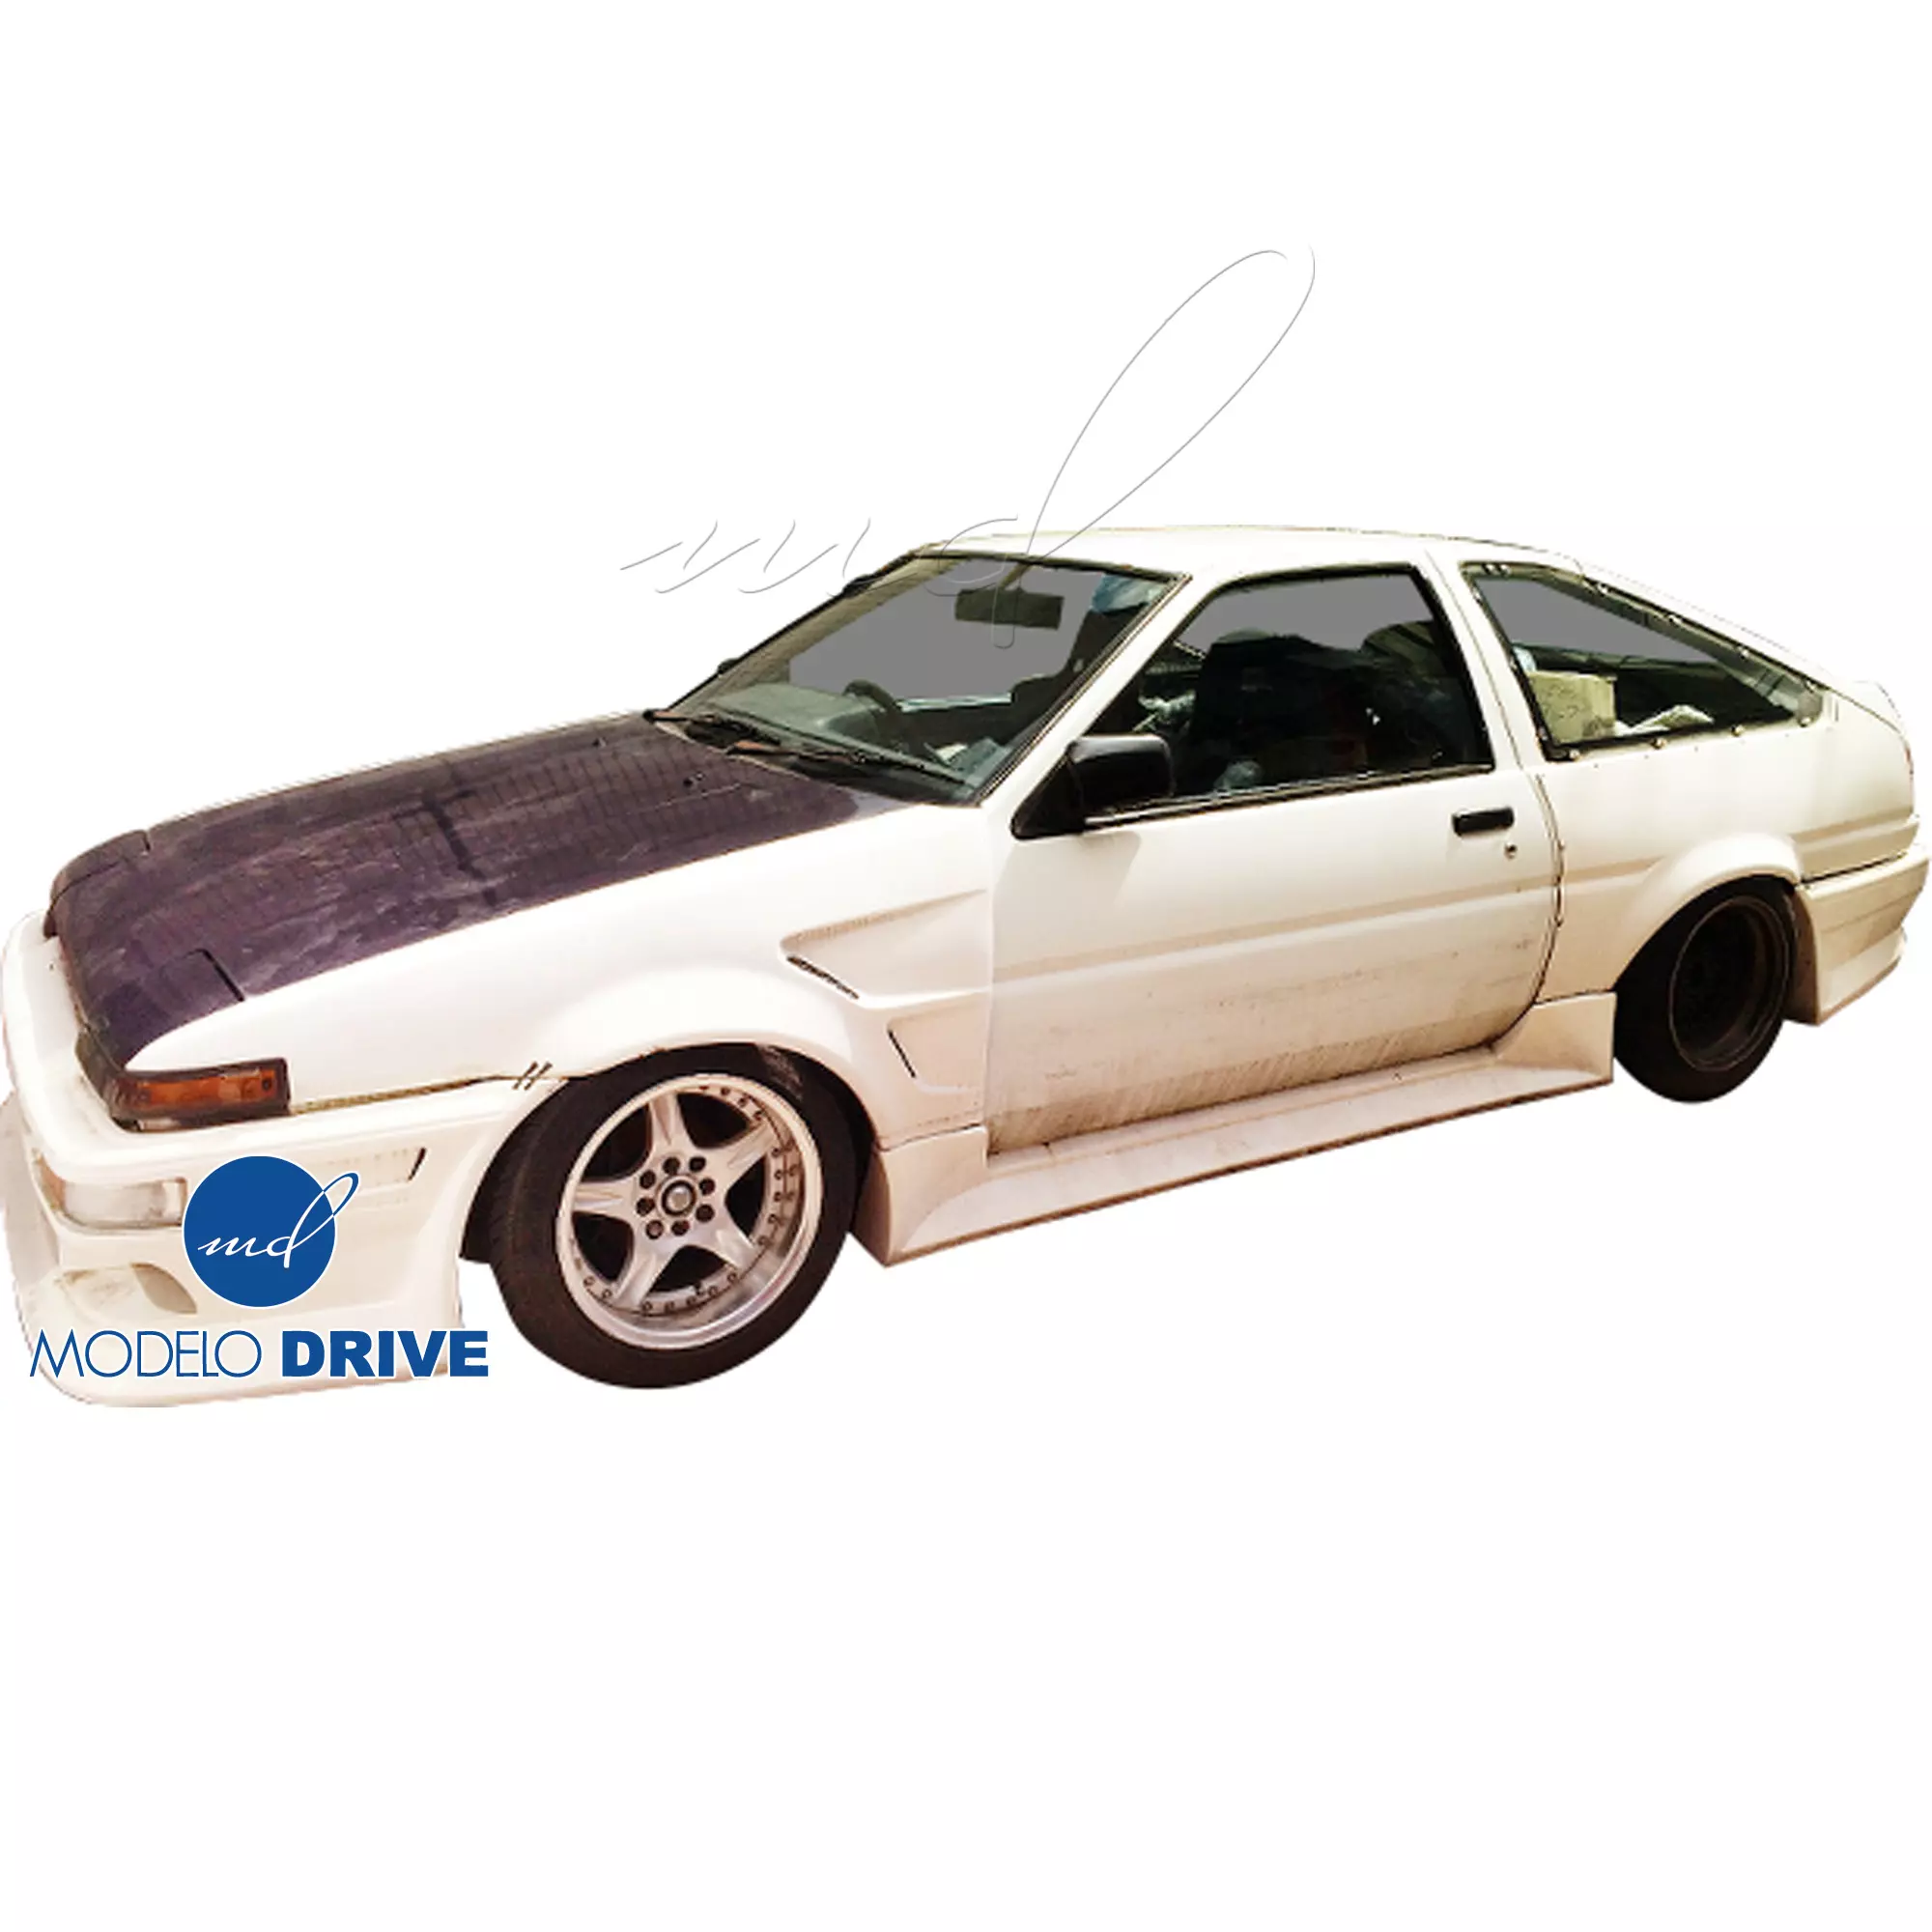 ModeloDrive FRP DMA D1 Wide Body 30mm Fenders Set > Toyota Corolla AE86 1984-1987 > 2dr Coupe - Image 7